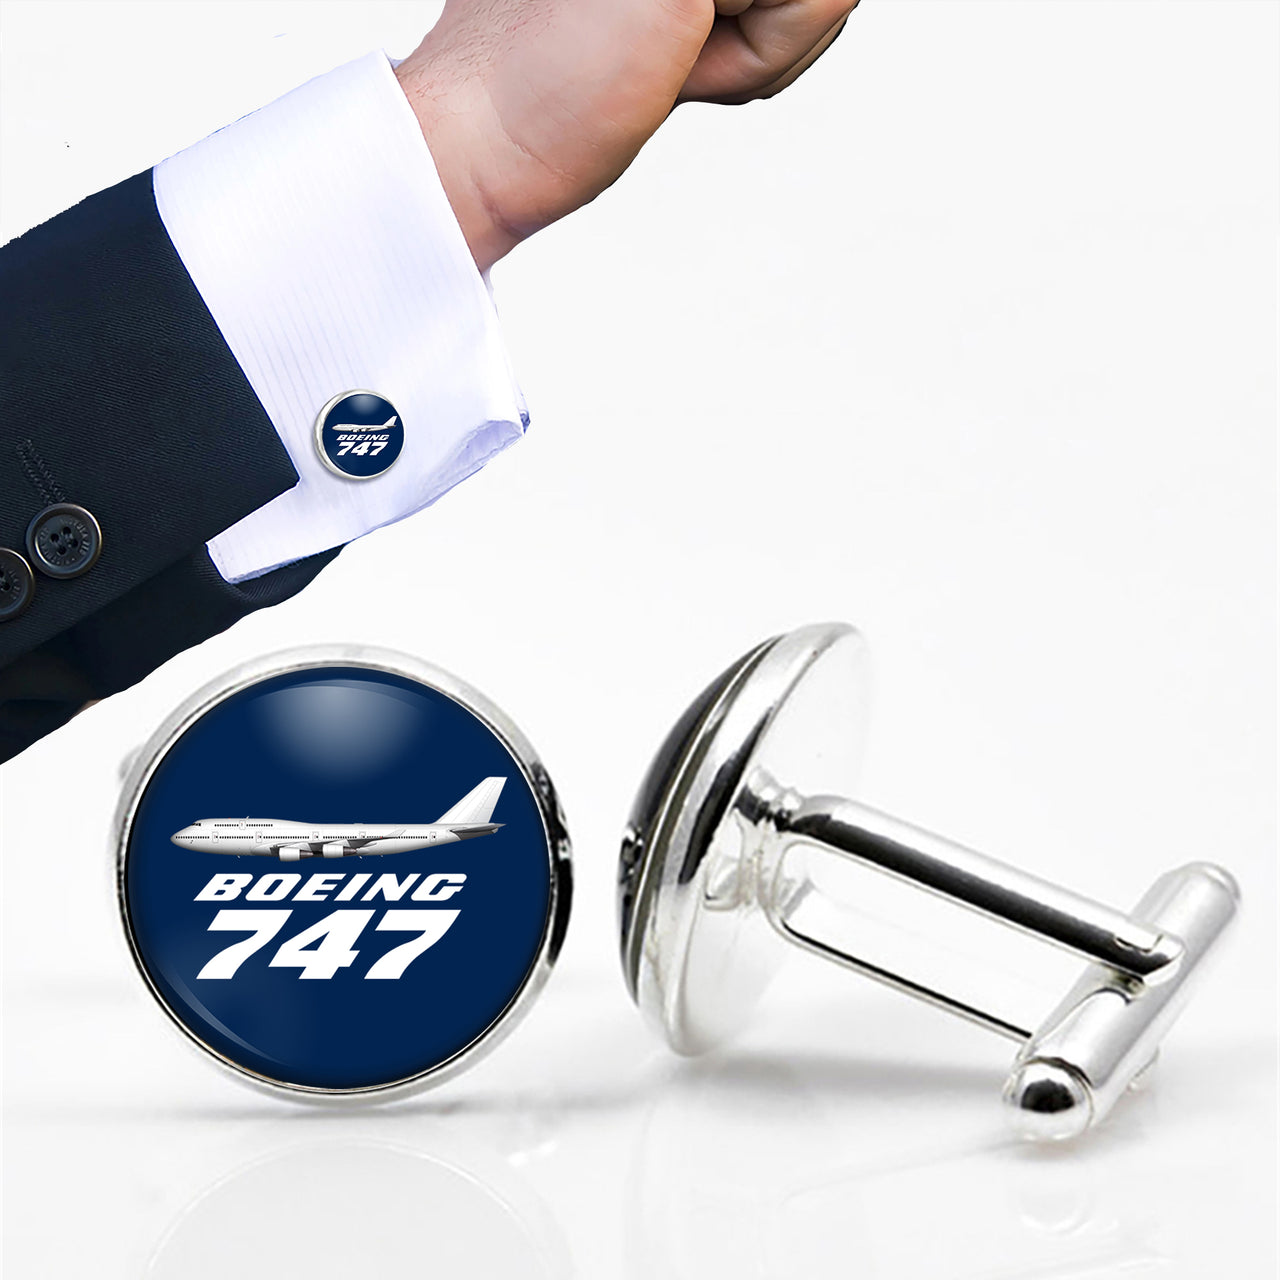 The Boeing 747 Designed Cuff Links